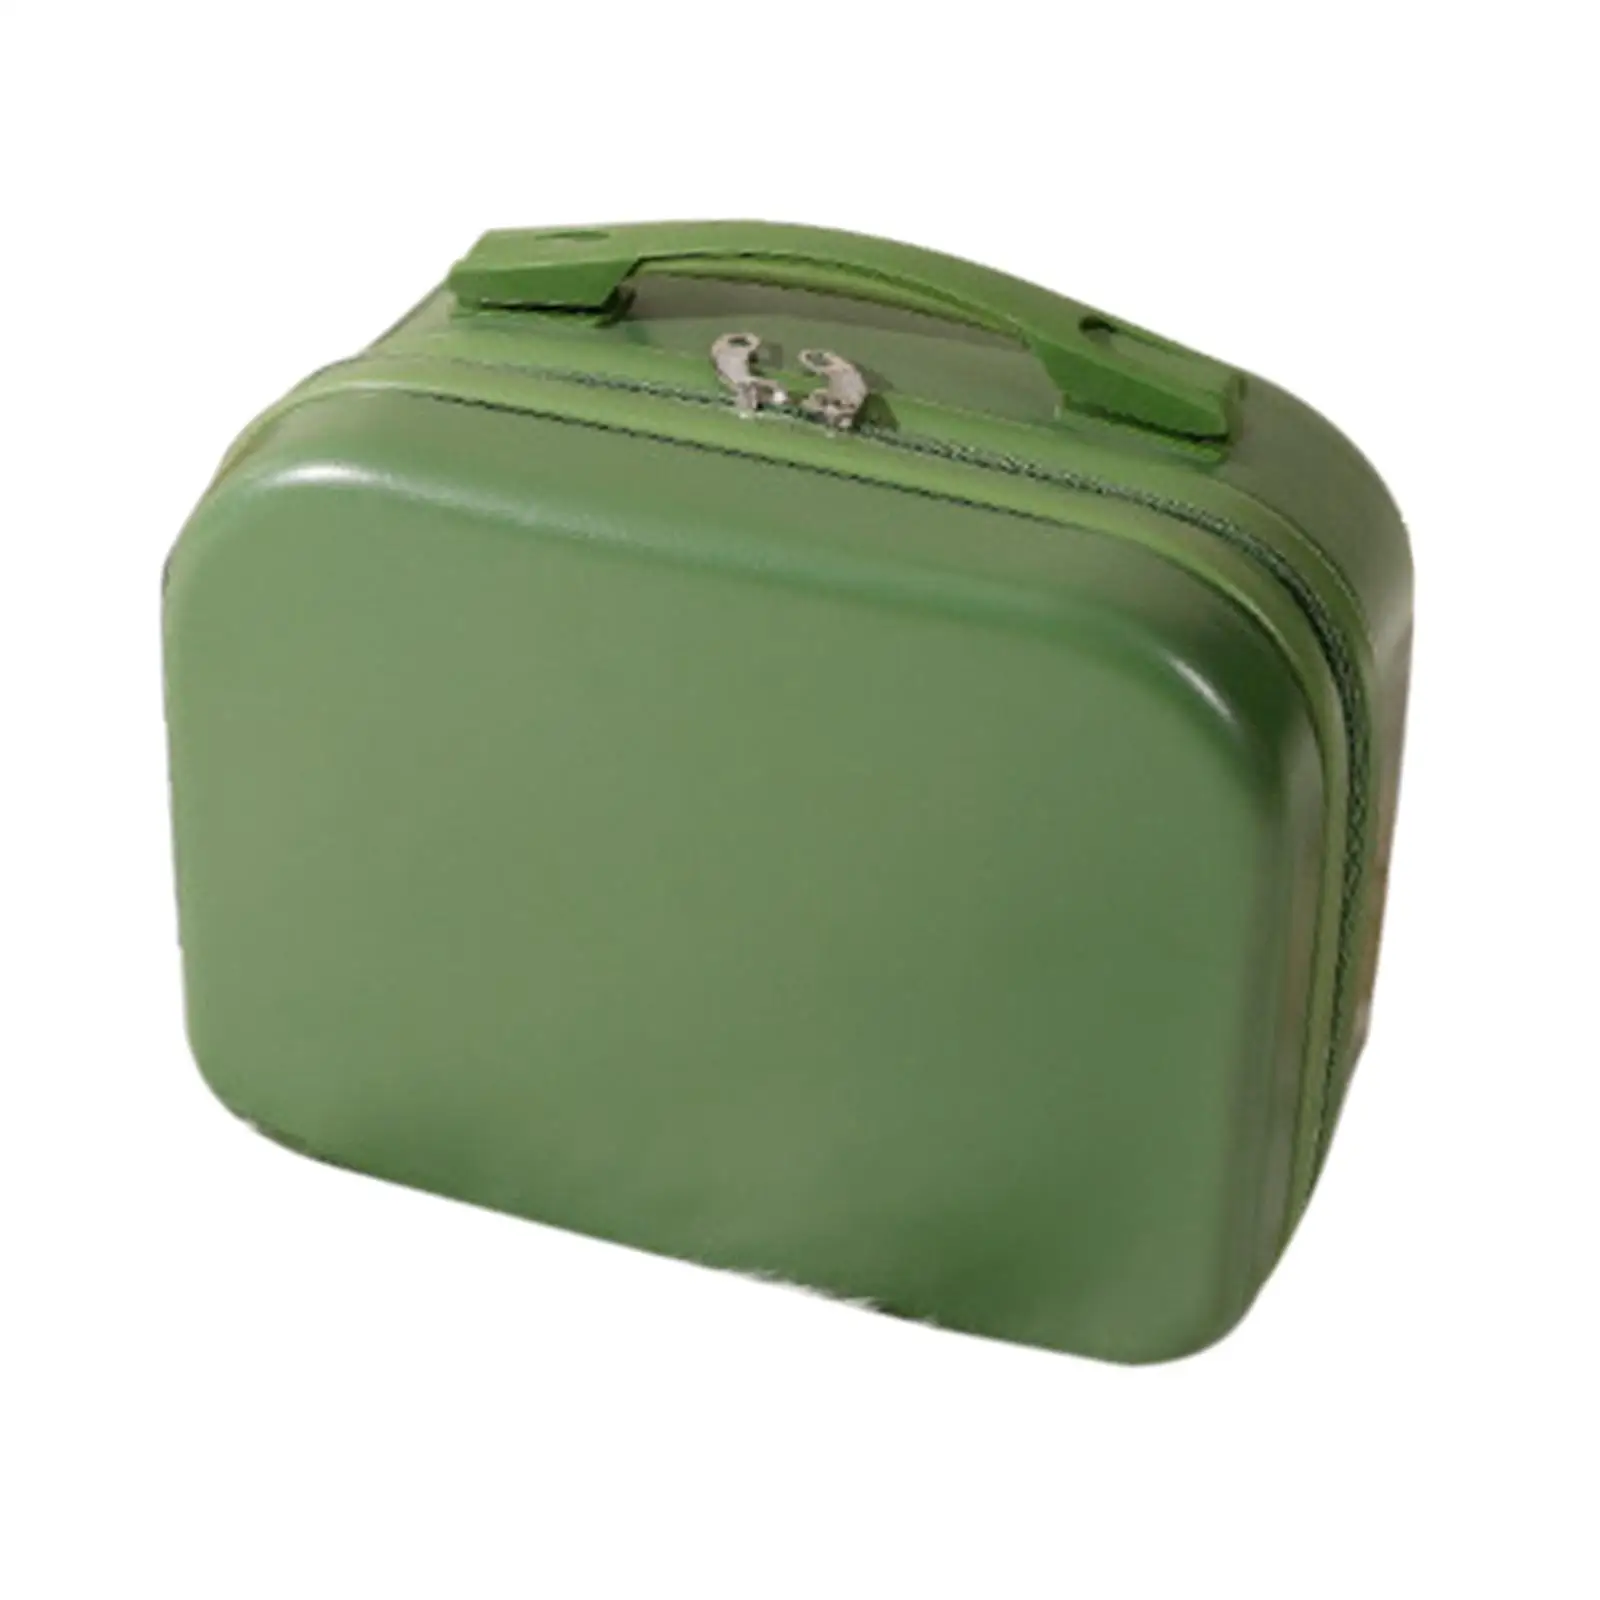 Girls Women Luggage Carrying Makeup Case Suitcase Travel Small Jewelry Box